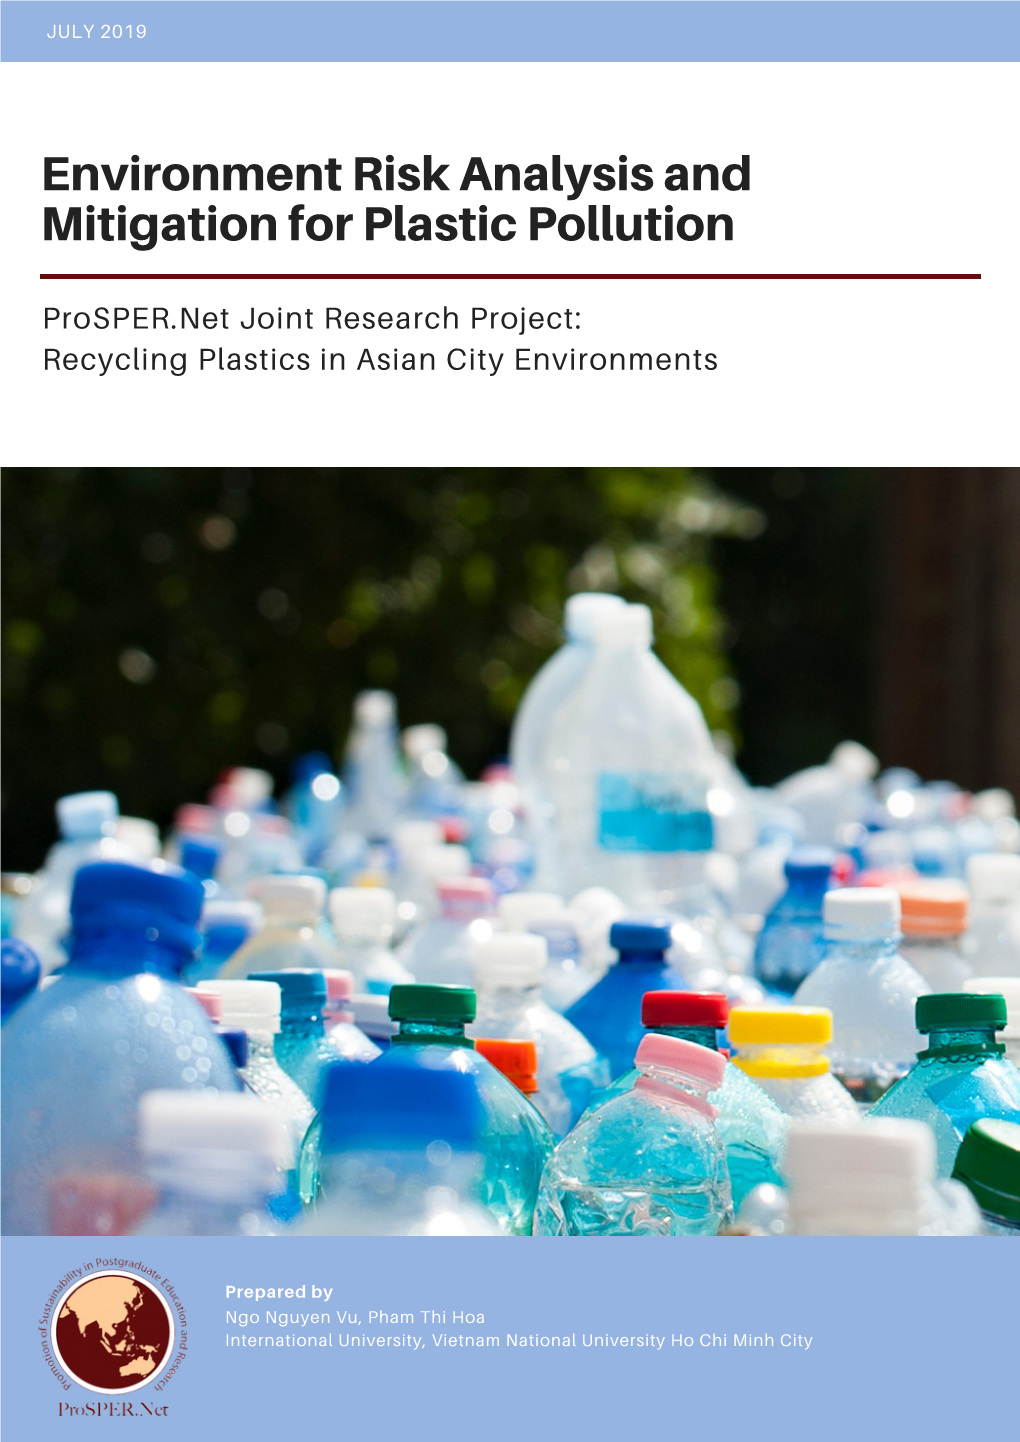 Replace Environment Risk Analysis and Mitigation for Plastic Pollution